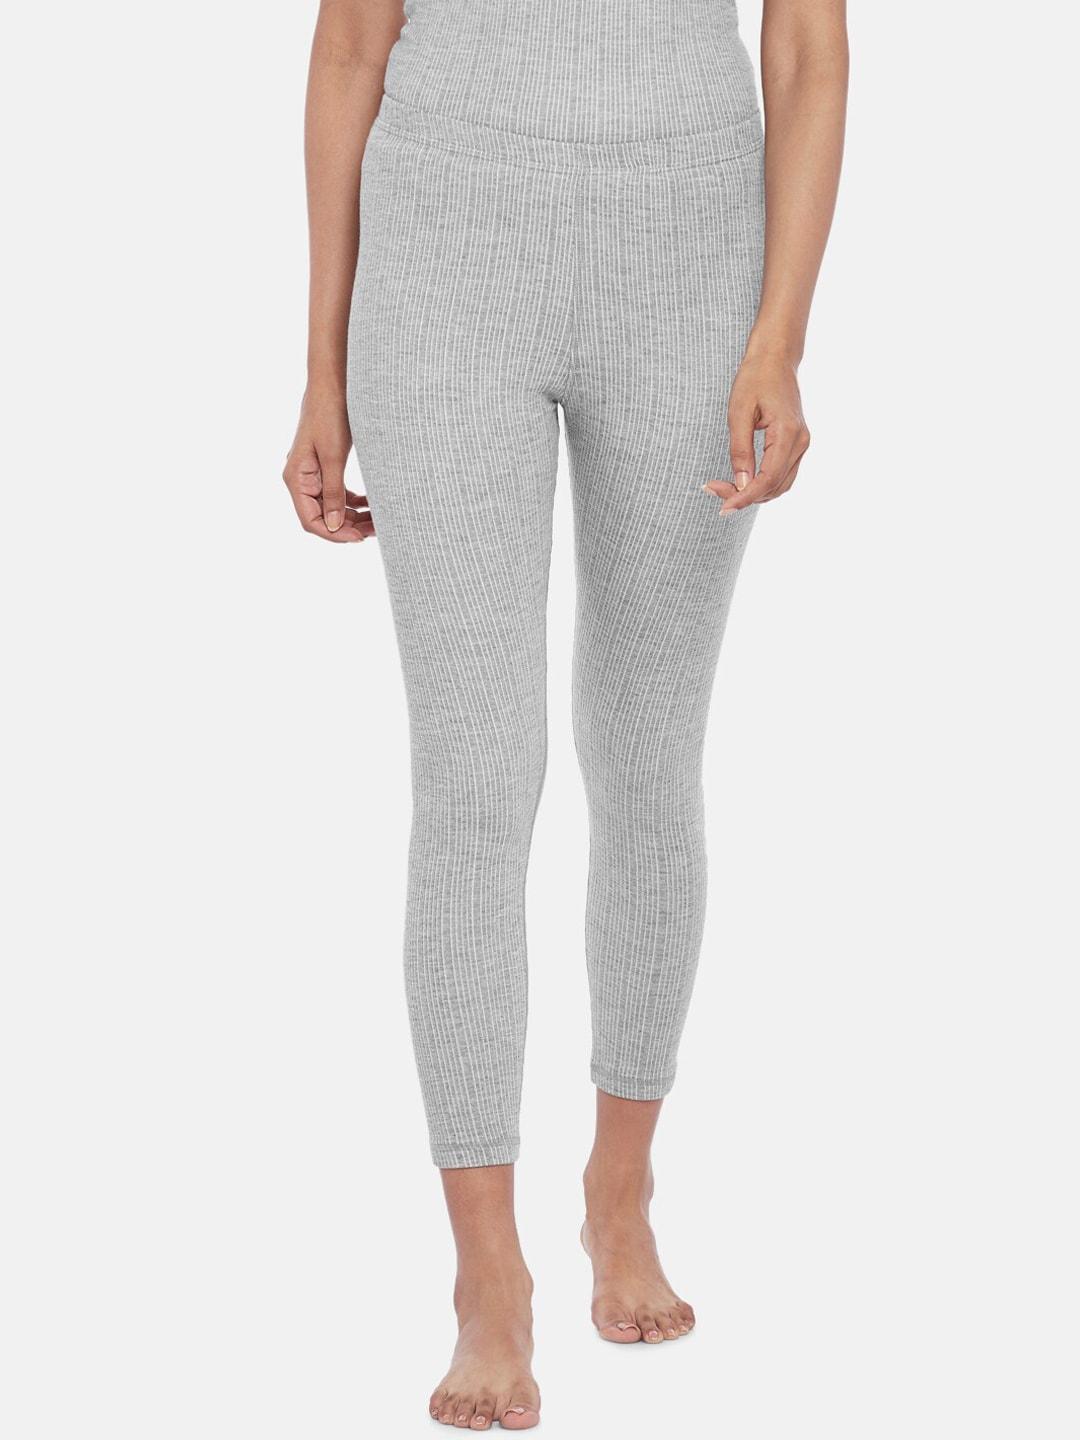 dreamz by pantaloons women grey solid thermal bottoms